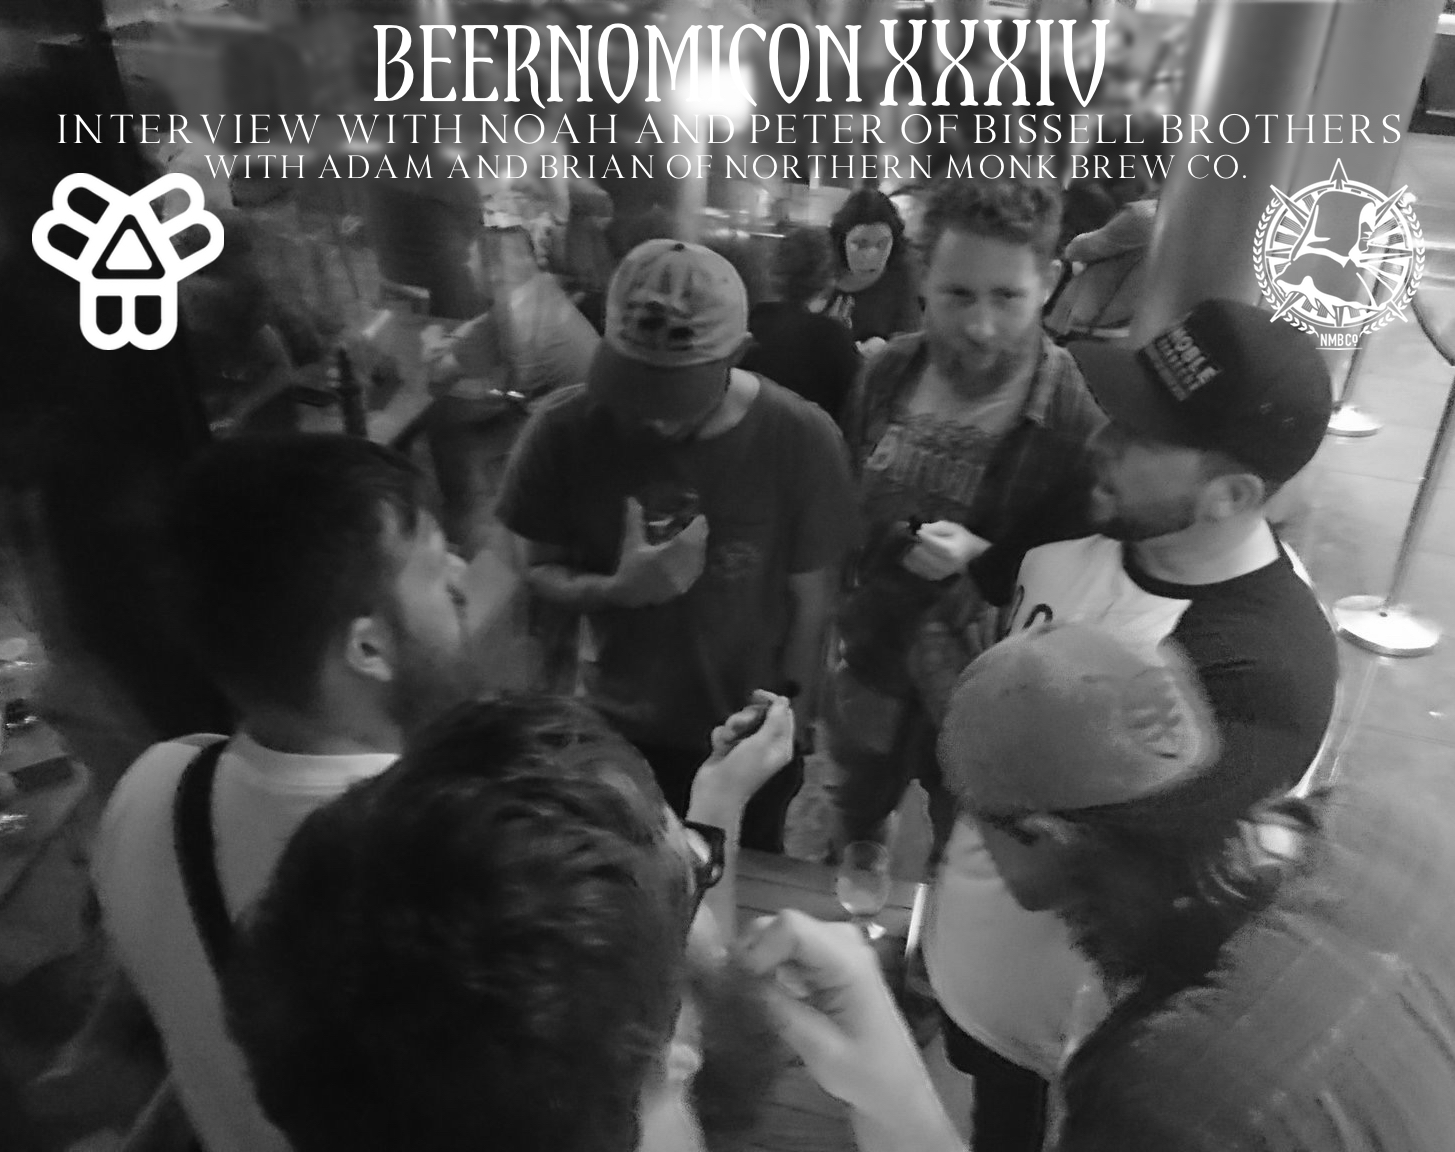 bissell brothers brewing podcast interview with northern monk for beernomicon